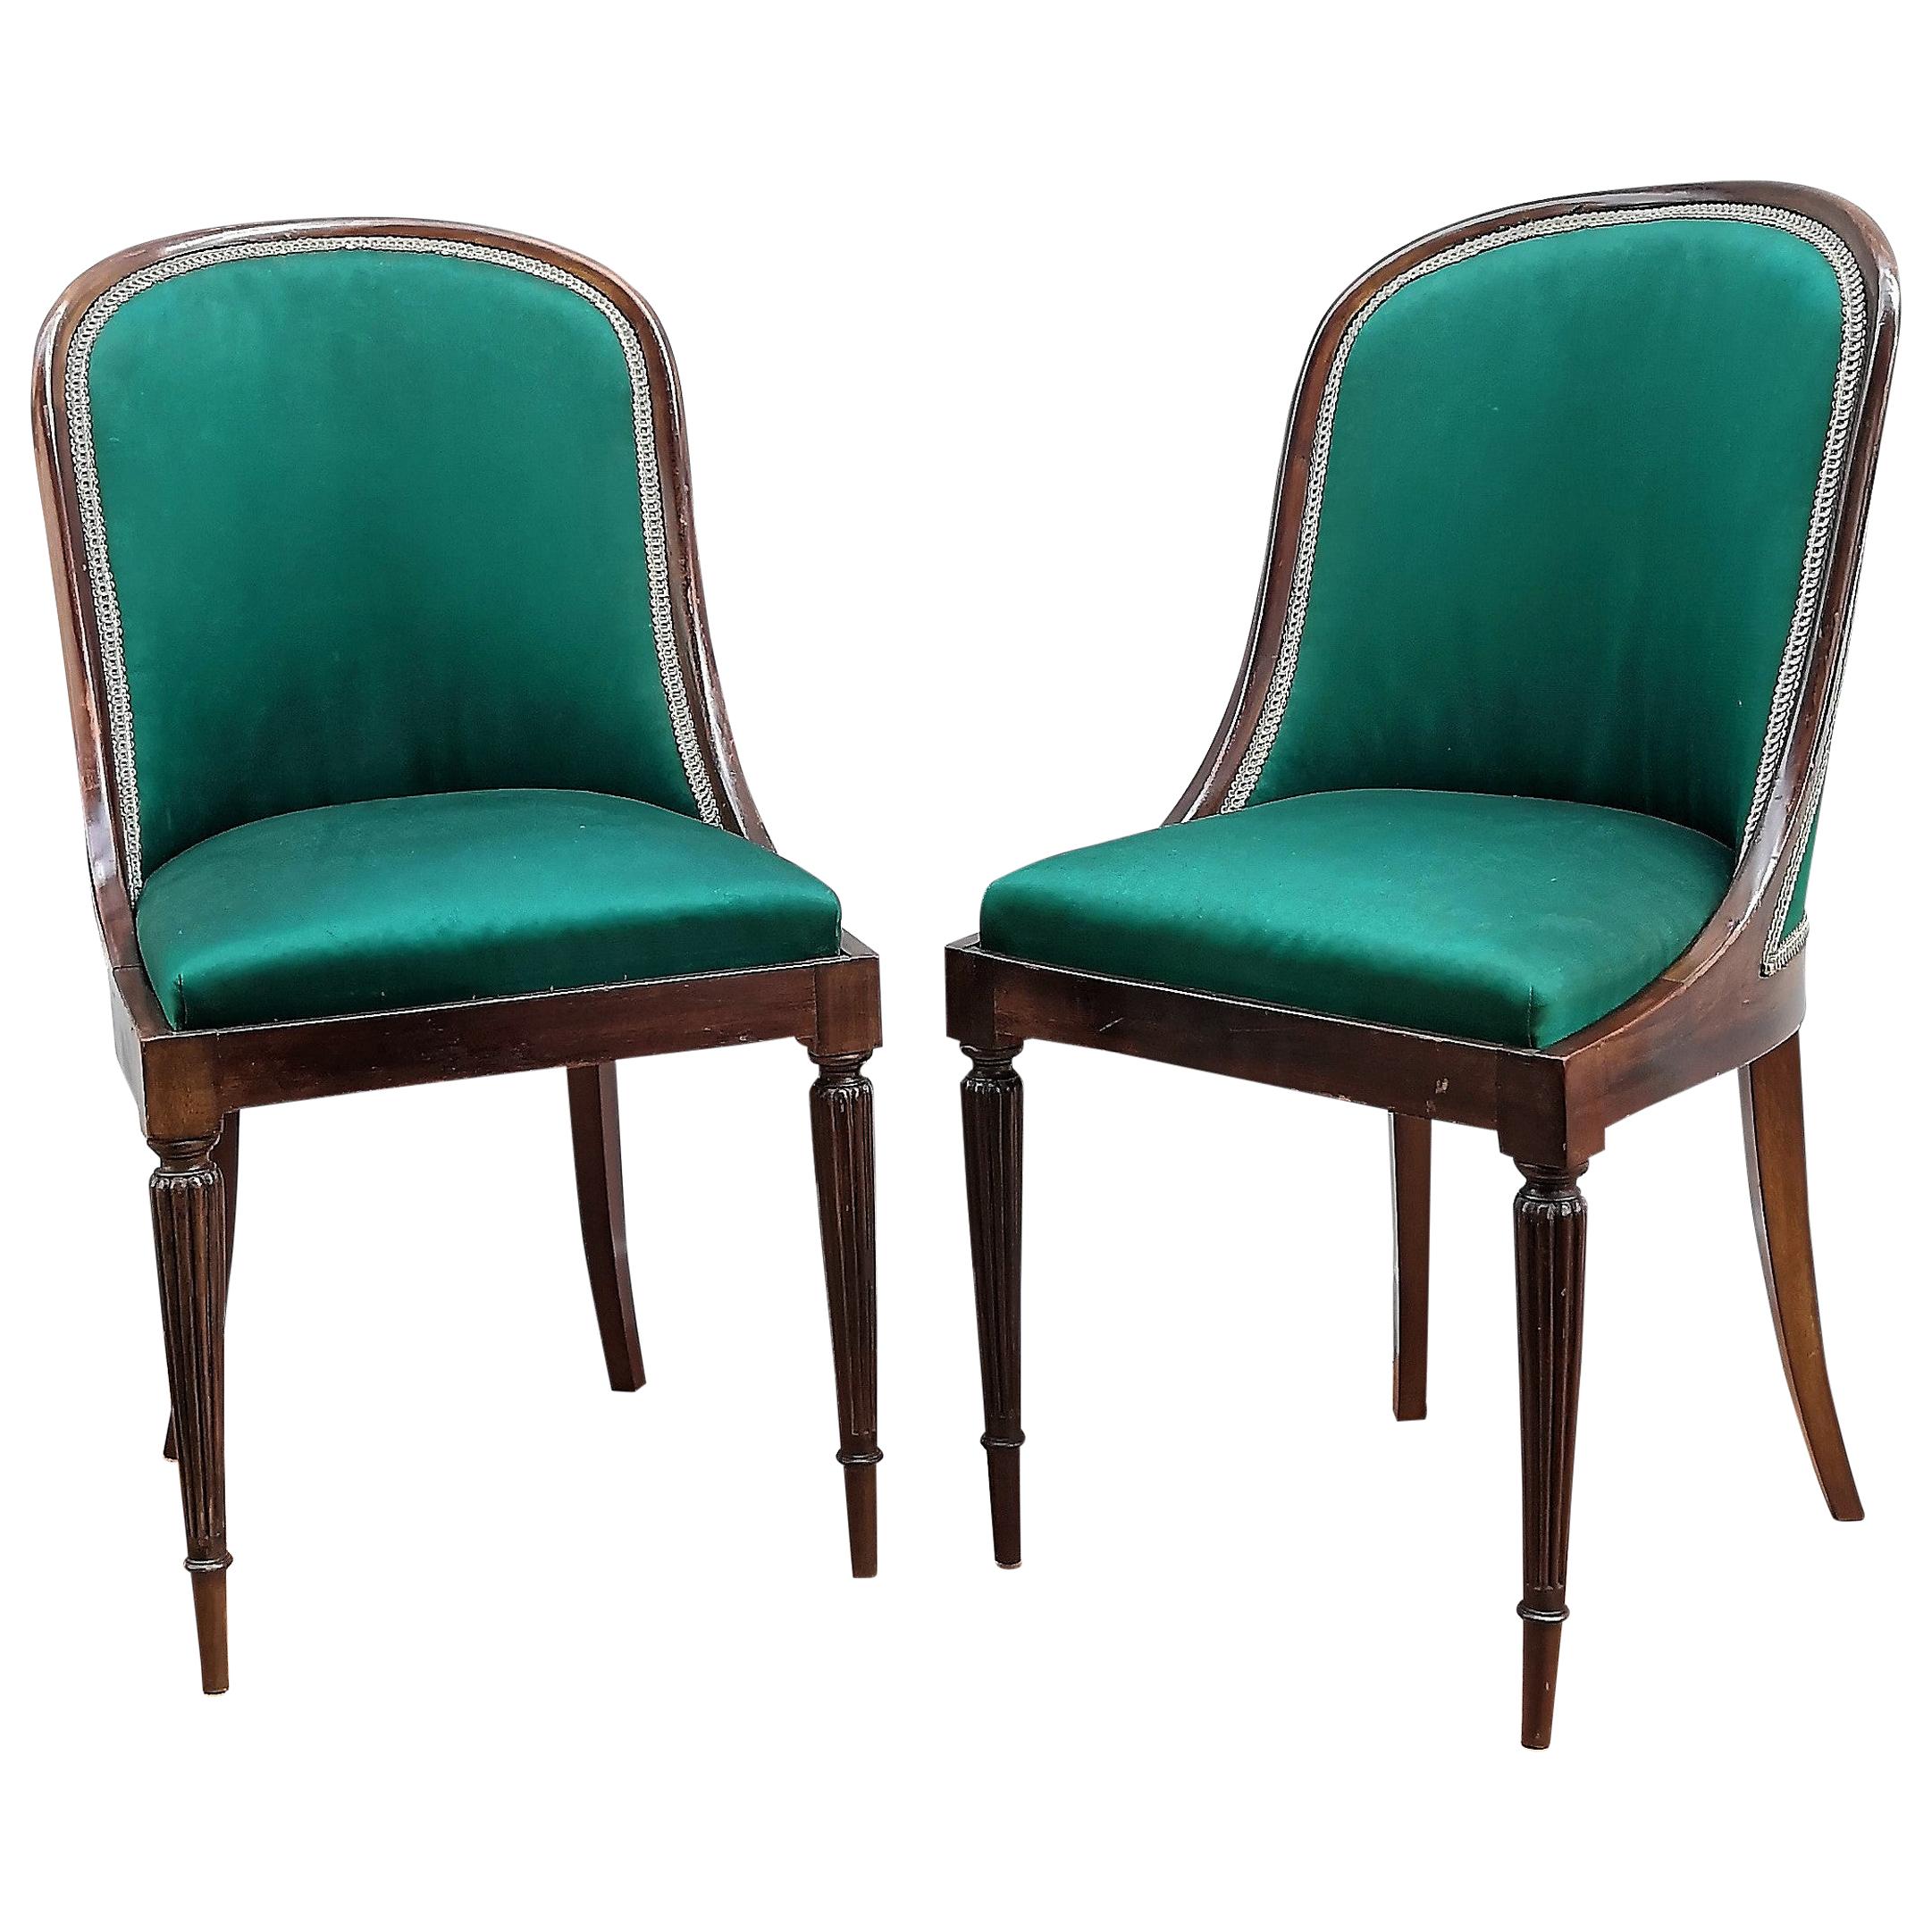 Pair of Italian Vintage Wooden Upholstered Chairs with Curved Back